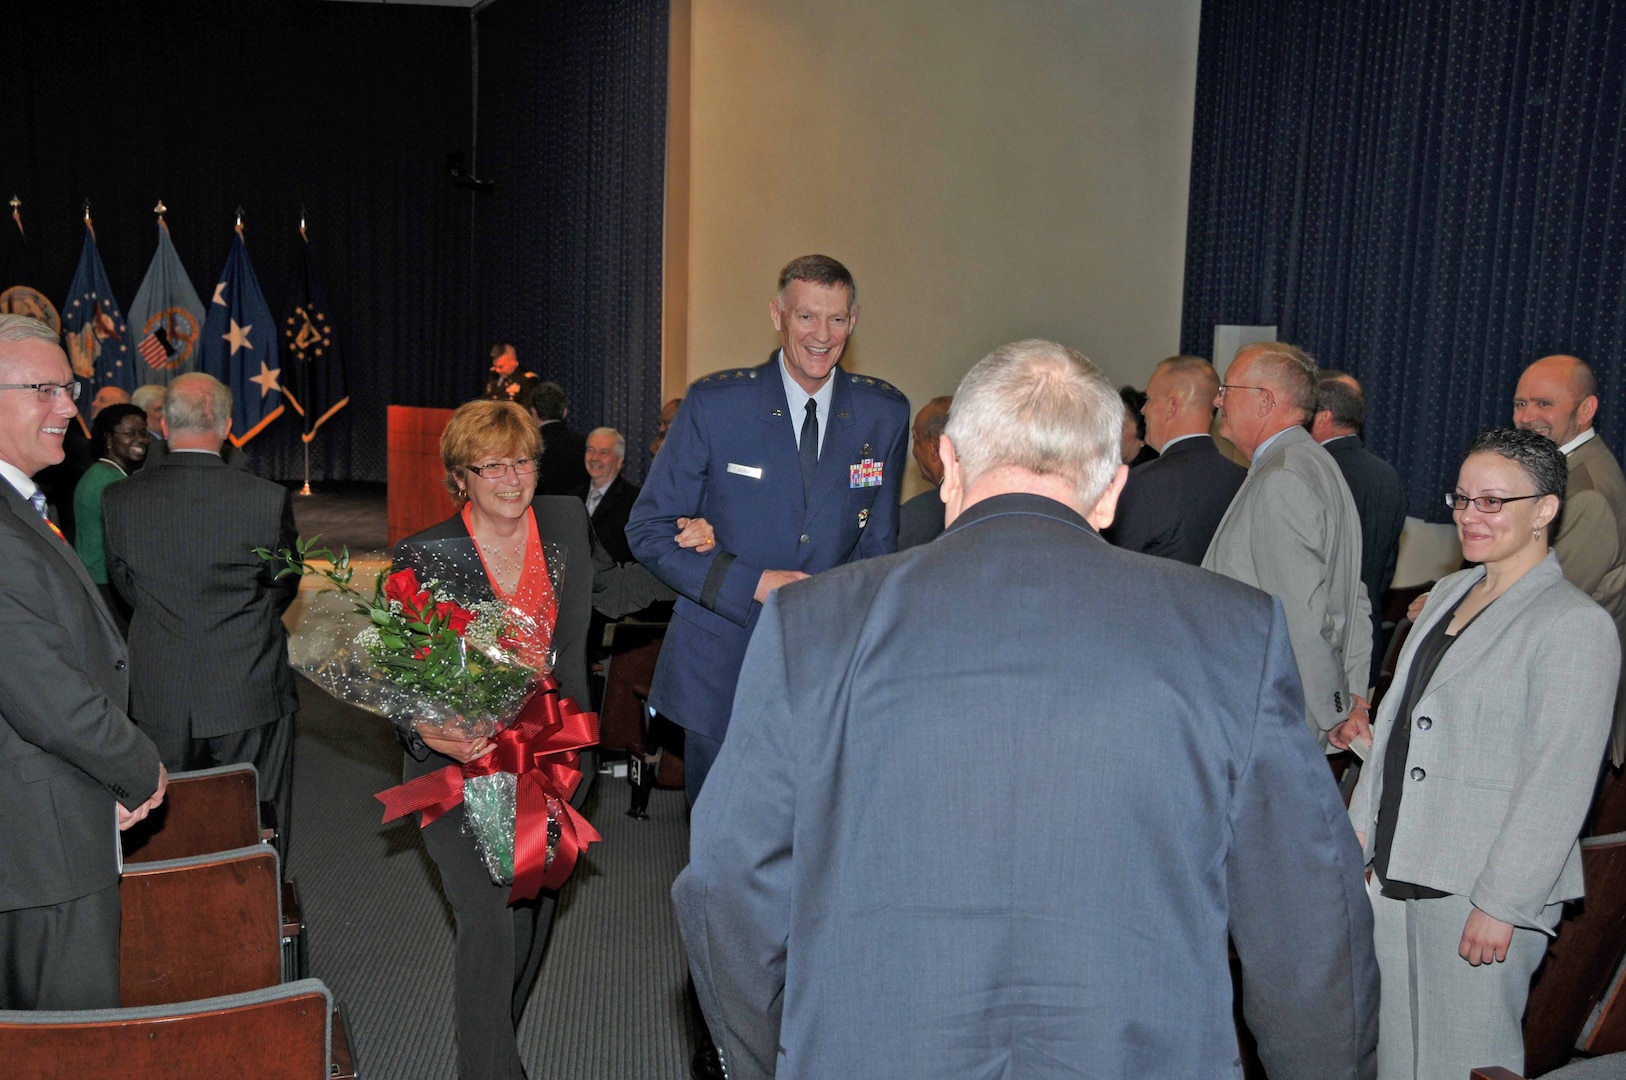 Ginger Pribble, who has been married to DLA General Counsel Fred Pribble for more than 30 years, is escorted from Pribble's retirement ceremony by DLA Director Air Force Lt. Gen. Andy Busch. Photo by Teodora Mocanu